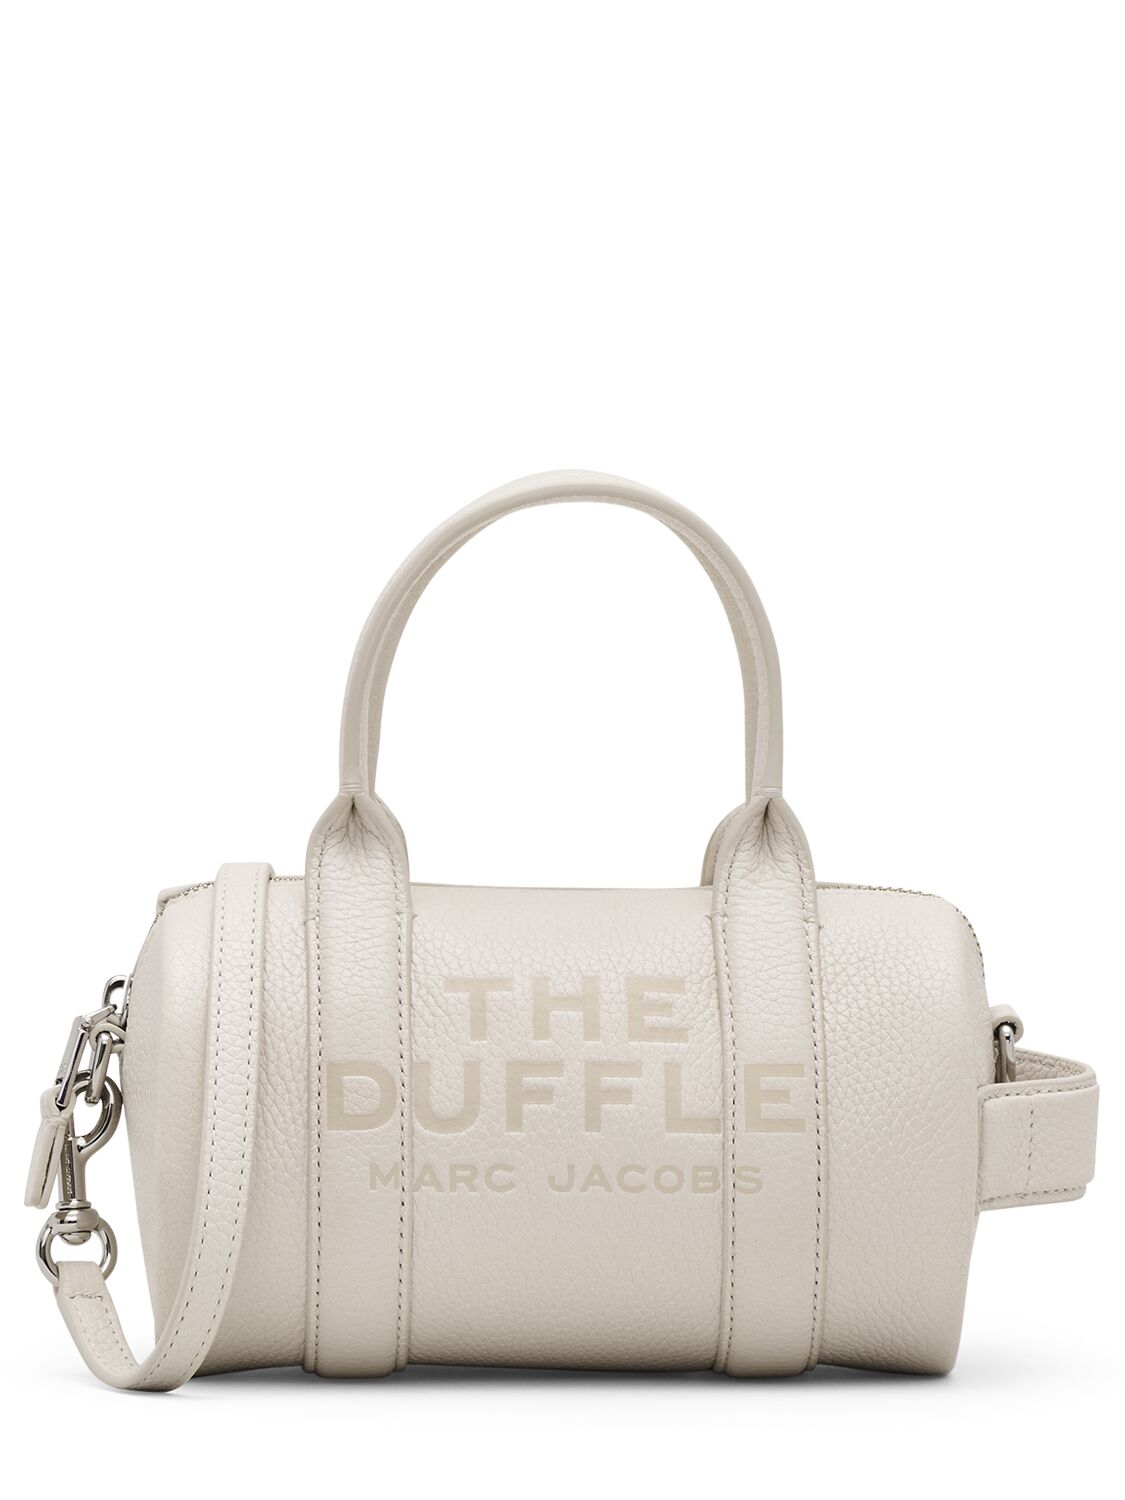 Marc Jacobs The Mini Duffle Leather Bag In White